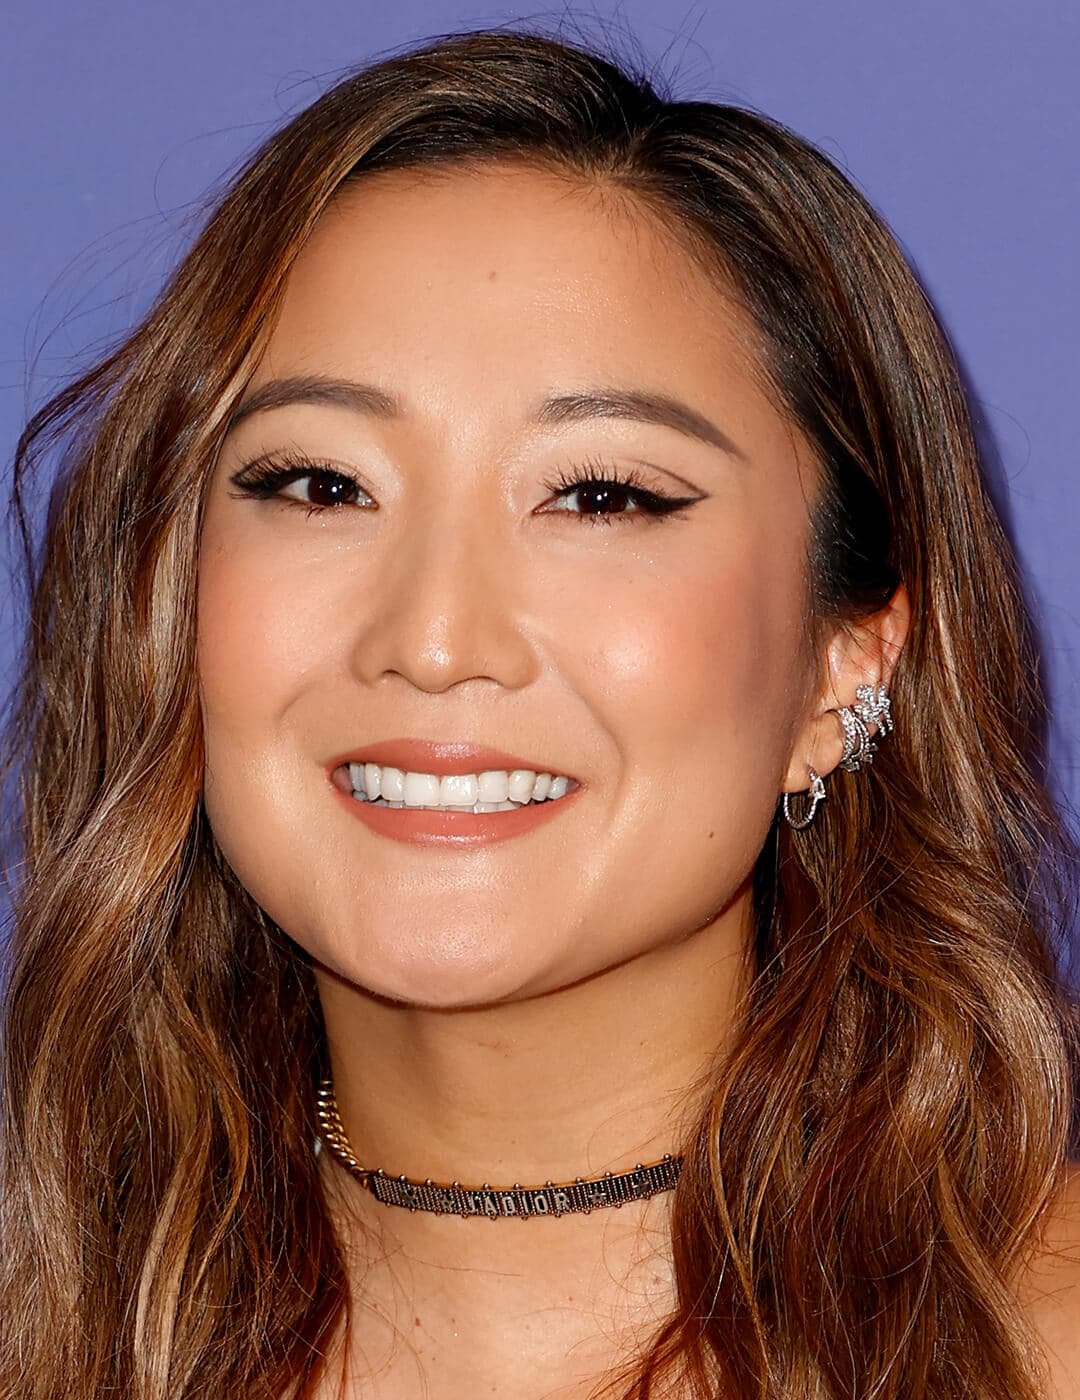 Smiling Ashley Park rocking a graphic eyeliner makeup look on the red carpet